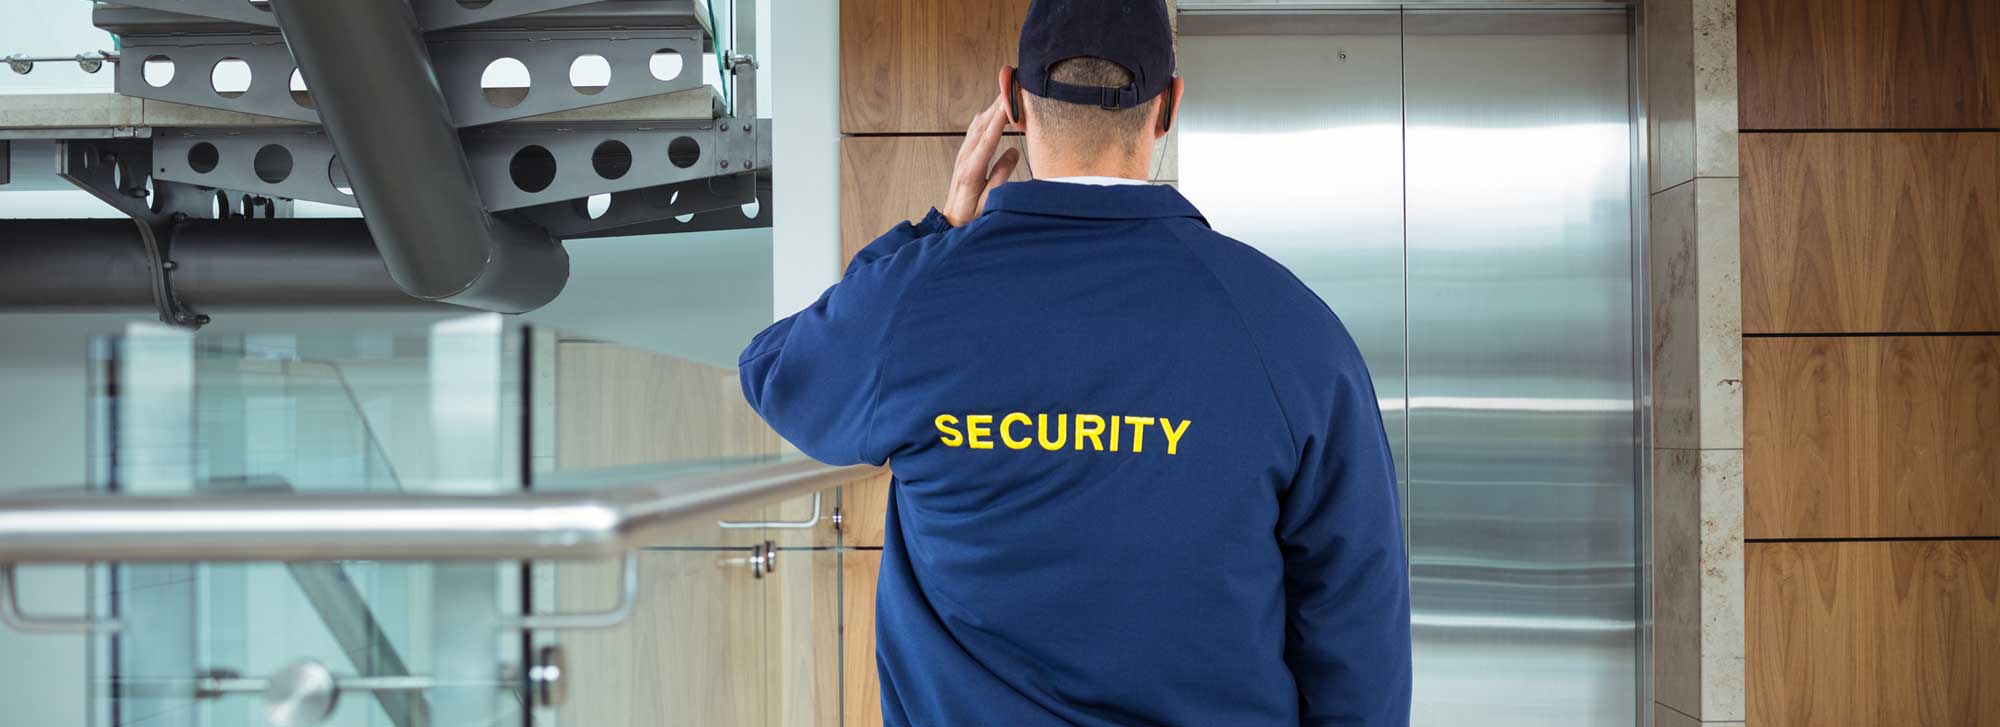 Security Industry 